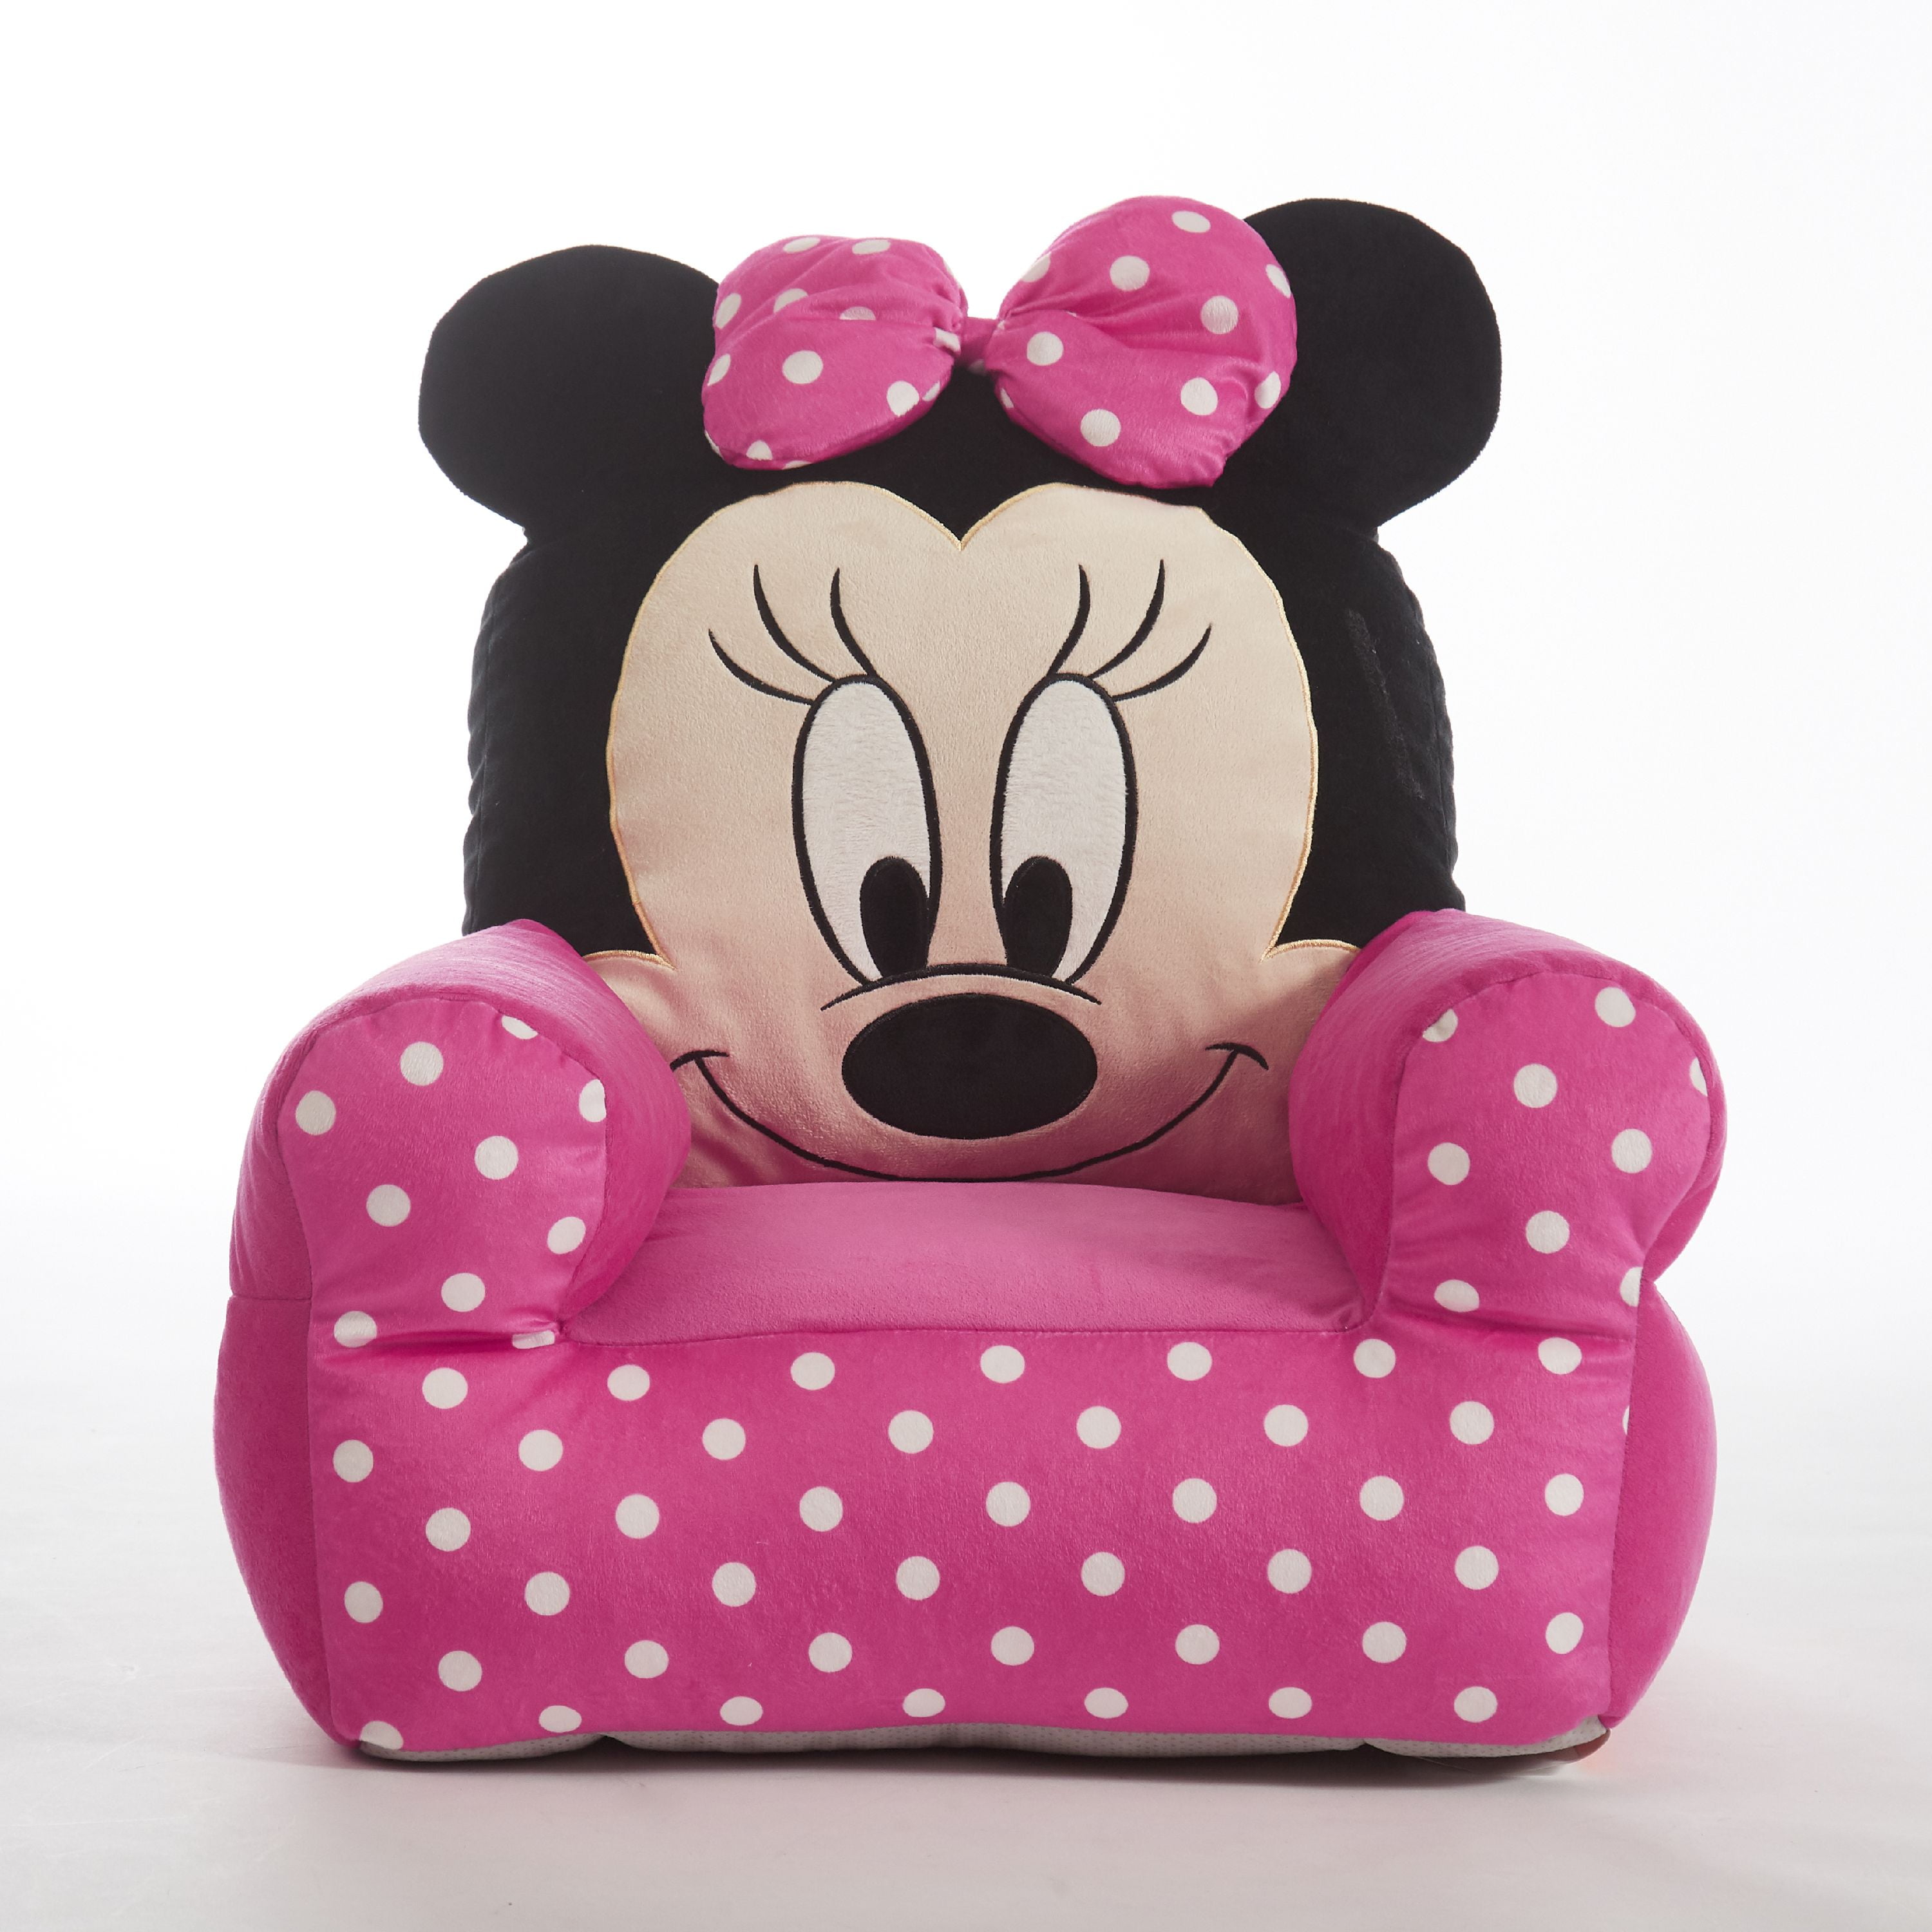 Minnie Mouse Plush Bean Bag Sofa Chair, Minnie Mouse Upholstered Chair With Ottoman